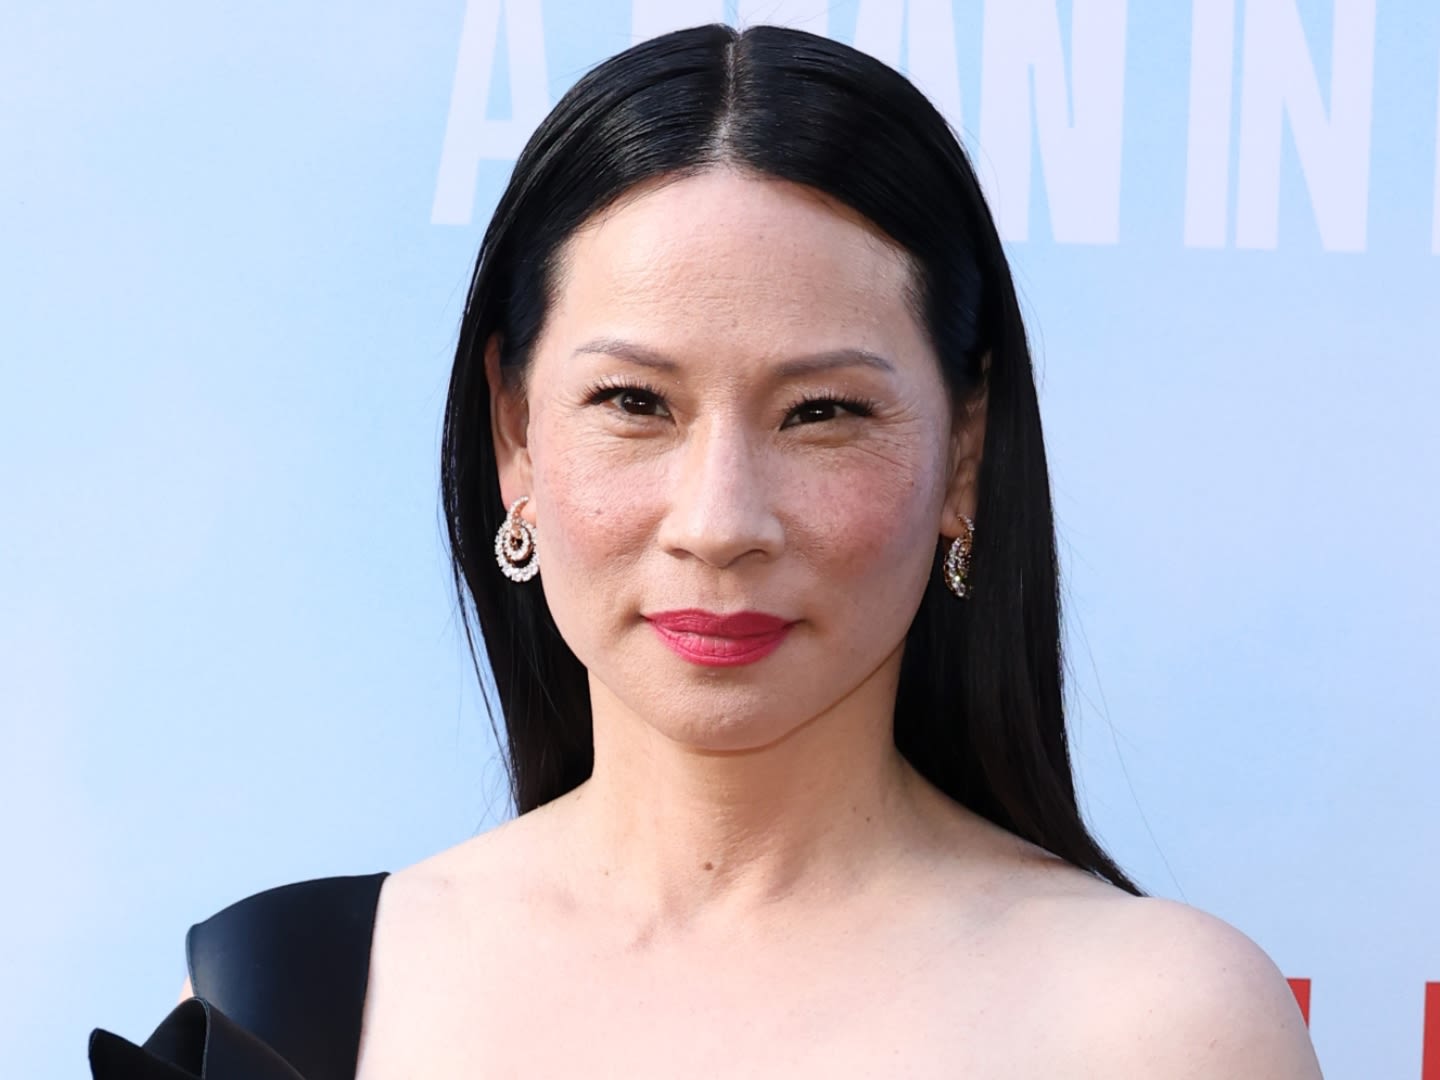 Lucy Liu Redefined the LBD Trend With This Super-Rare, Chic Red Carpet Appearance